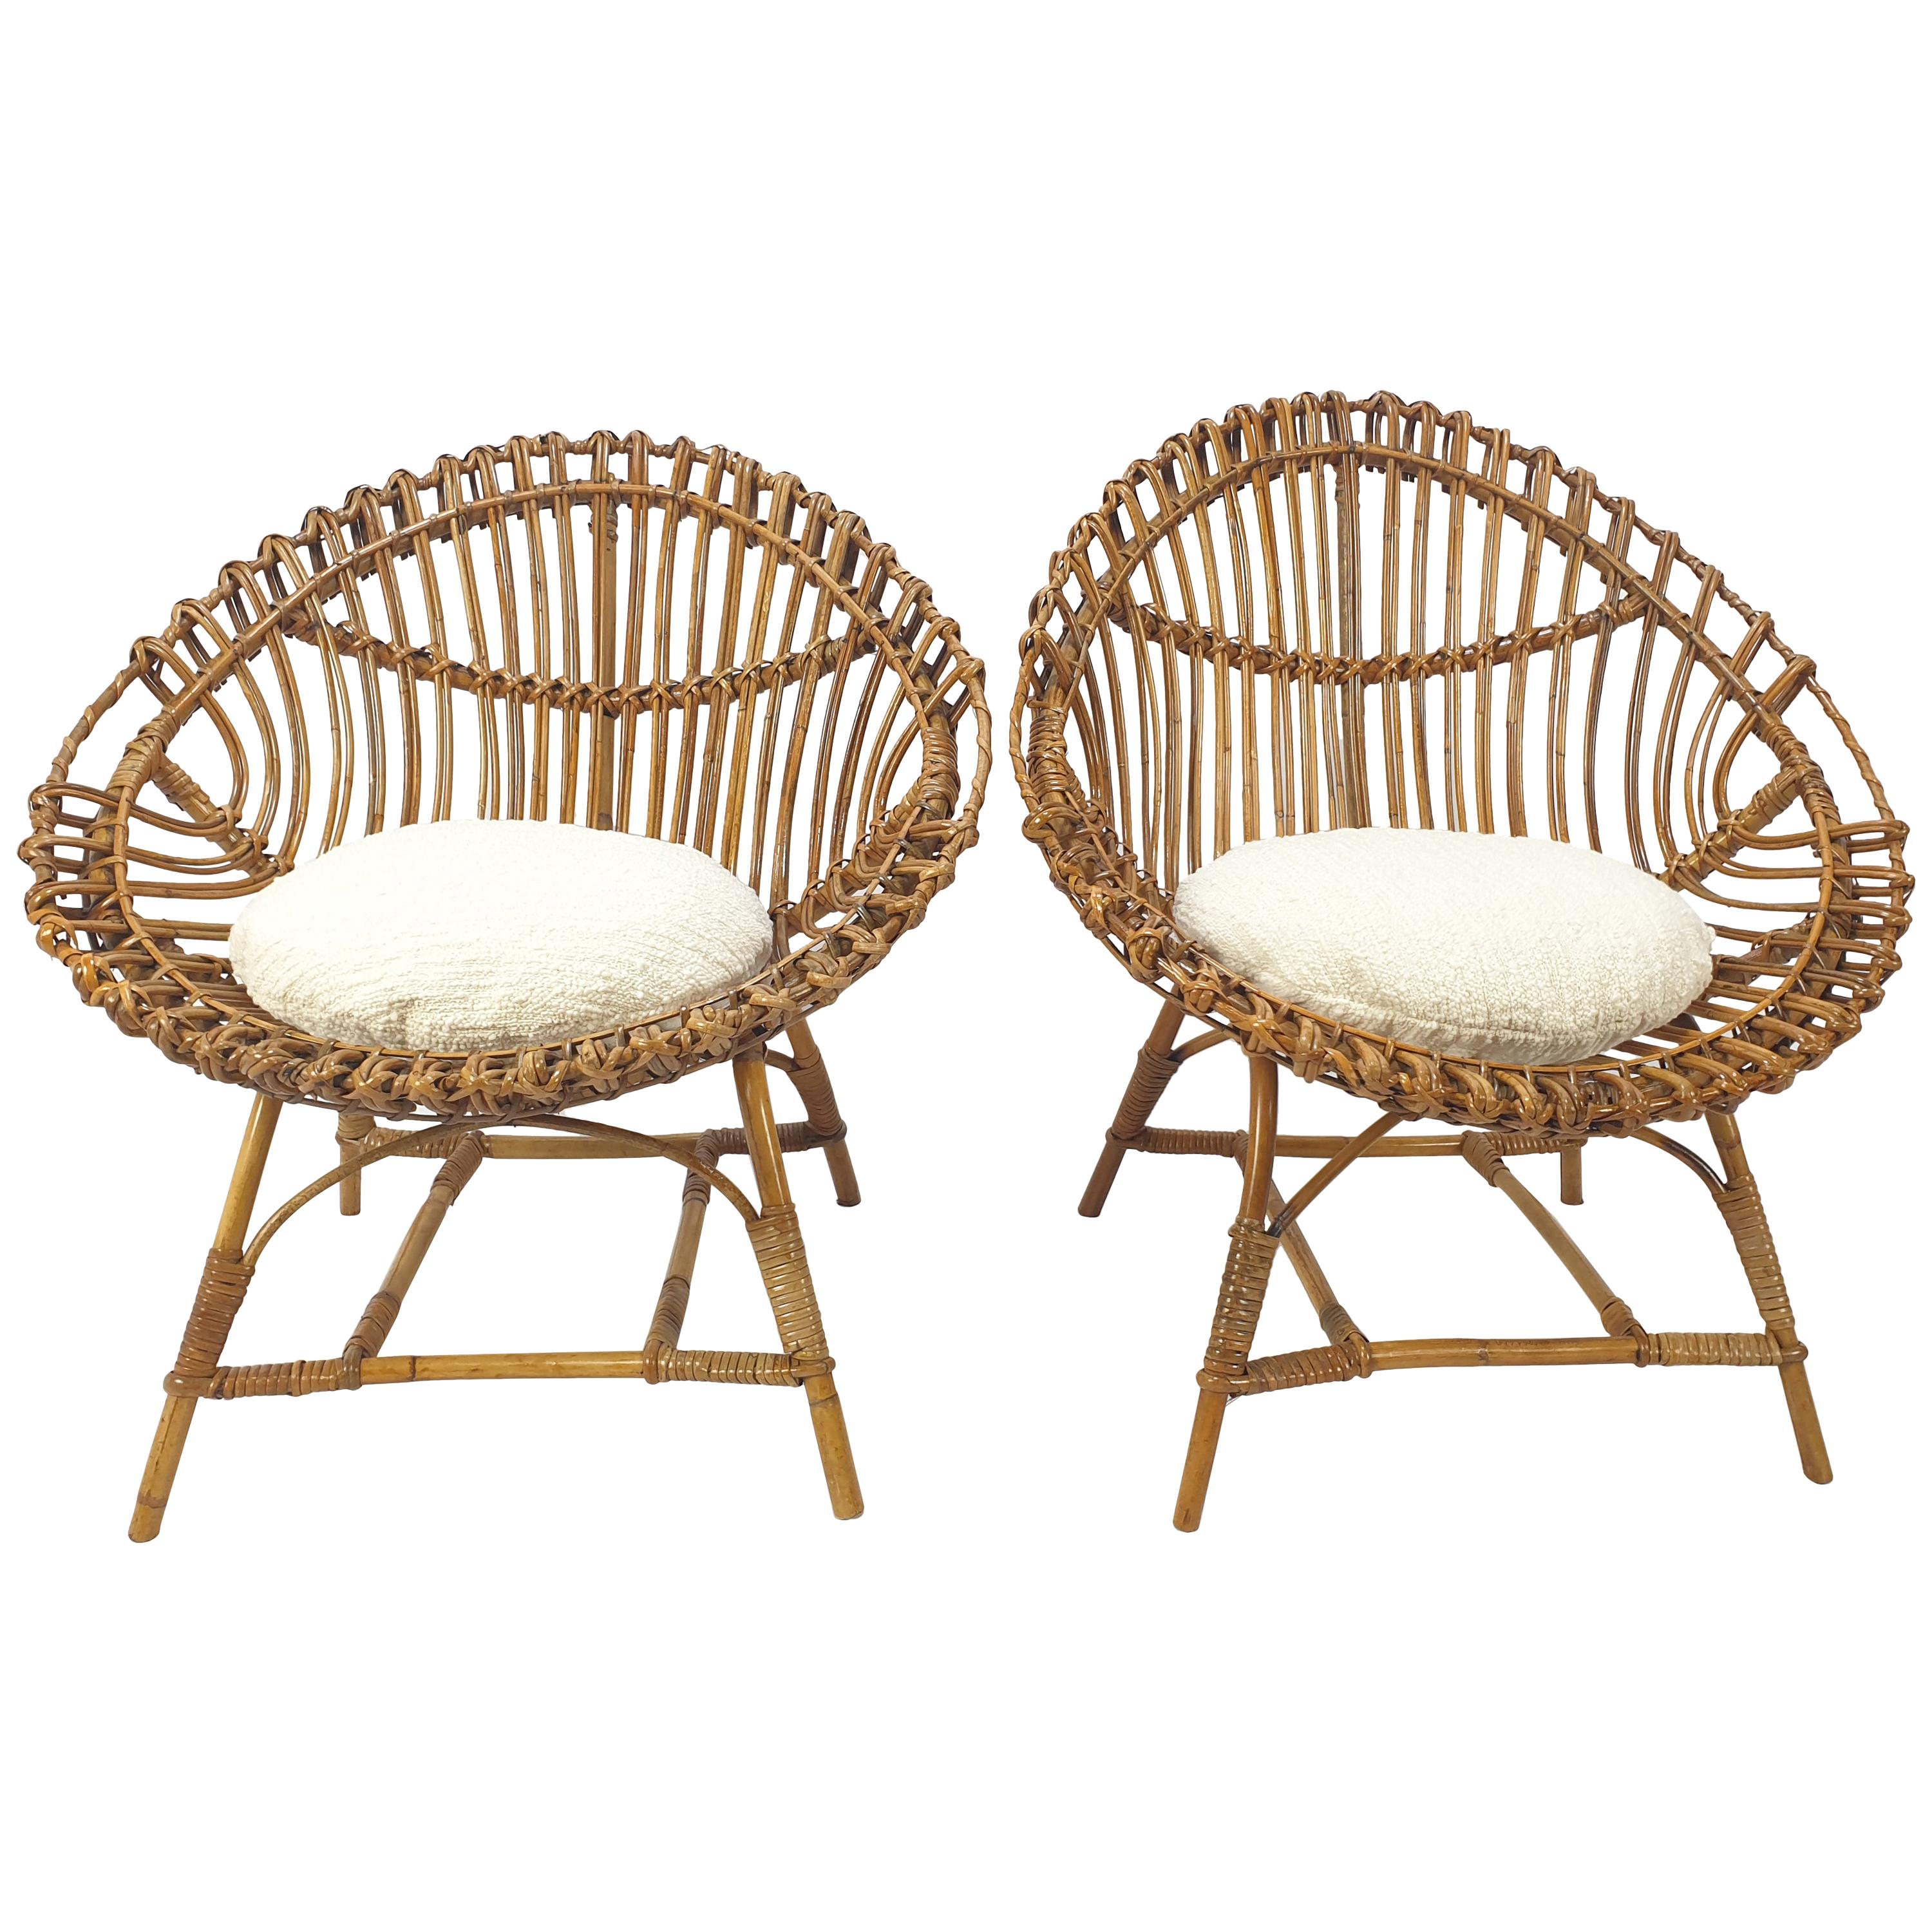 Pair of Italian Mid Century Rattan and Bamboo Lounge Chairs, 1960's